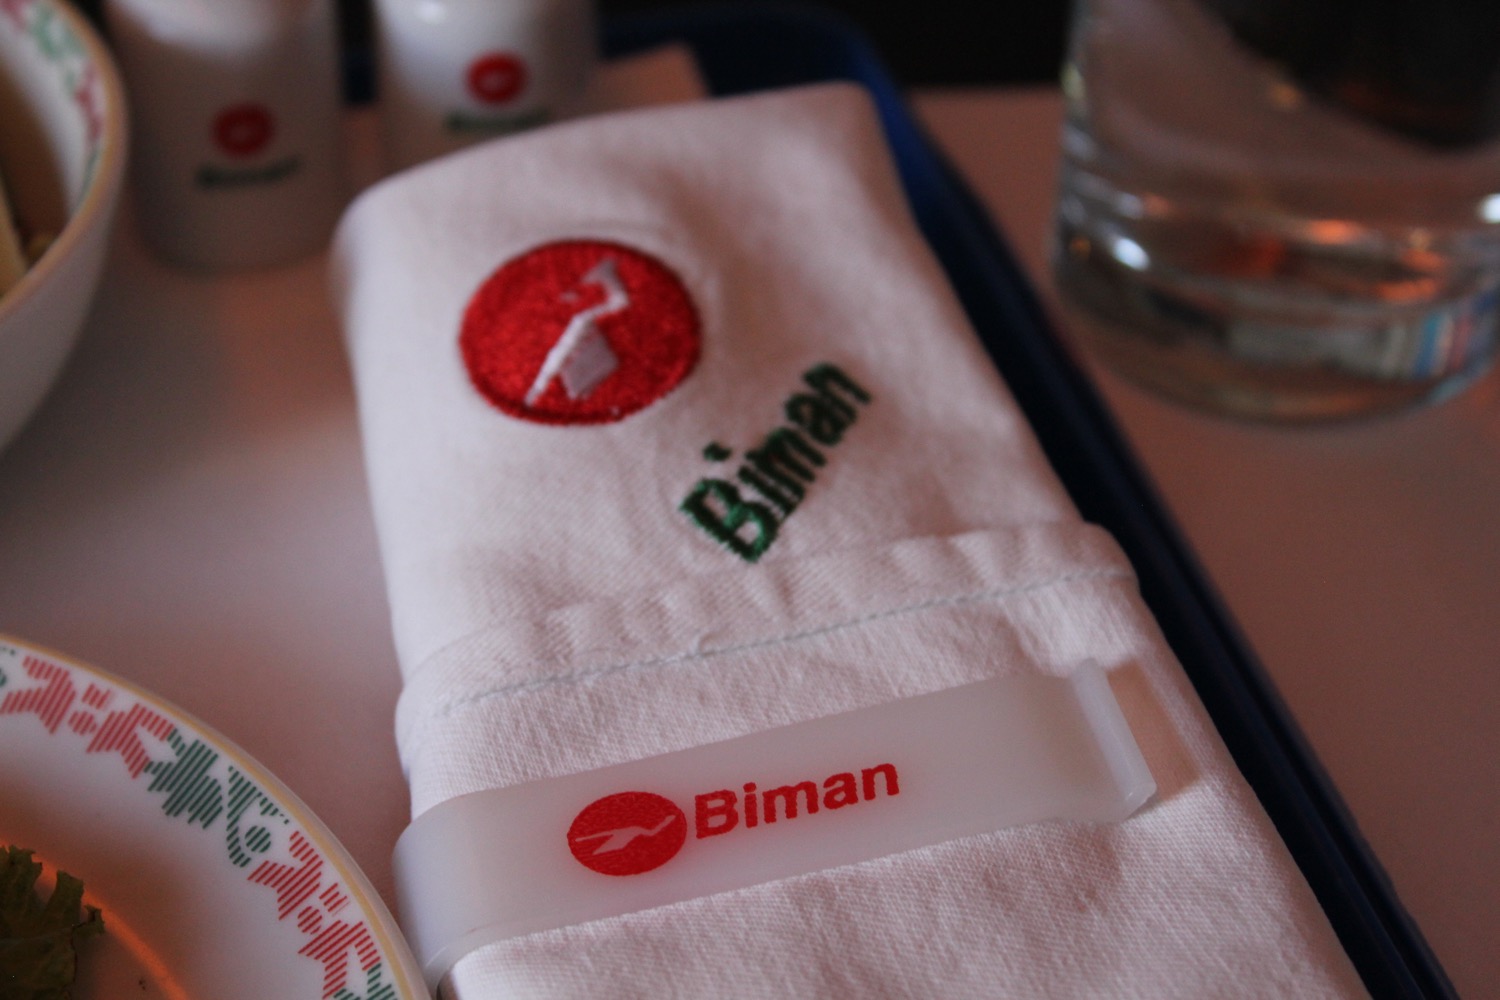 a white towel with a logo on it